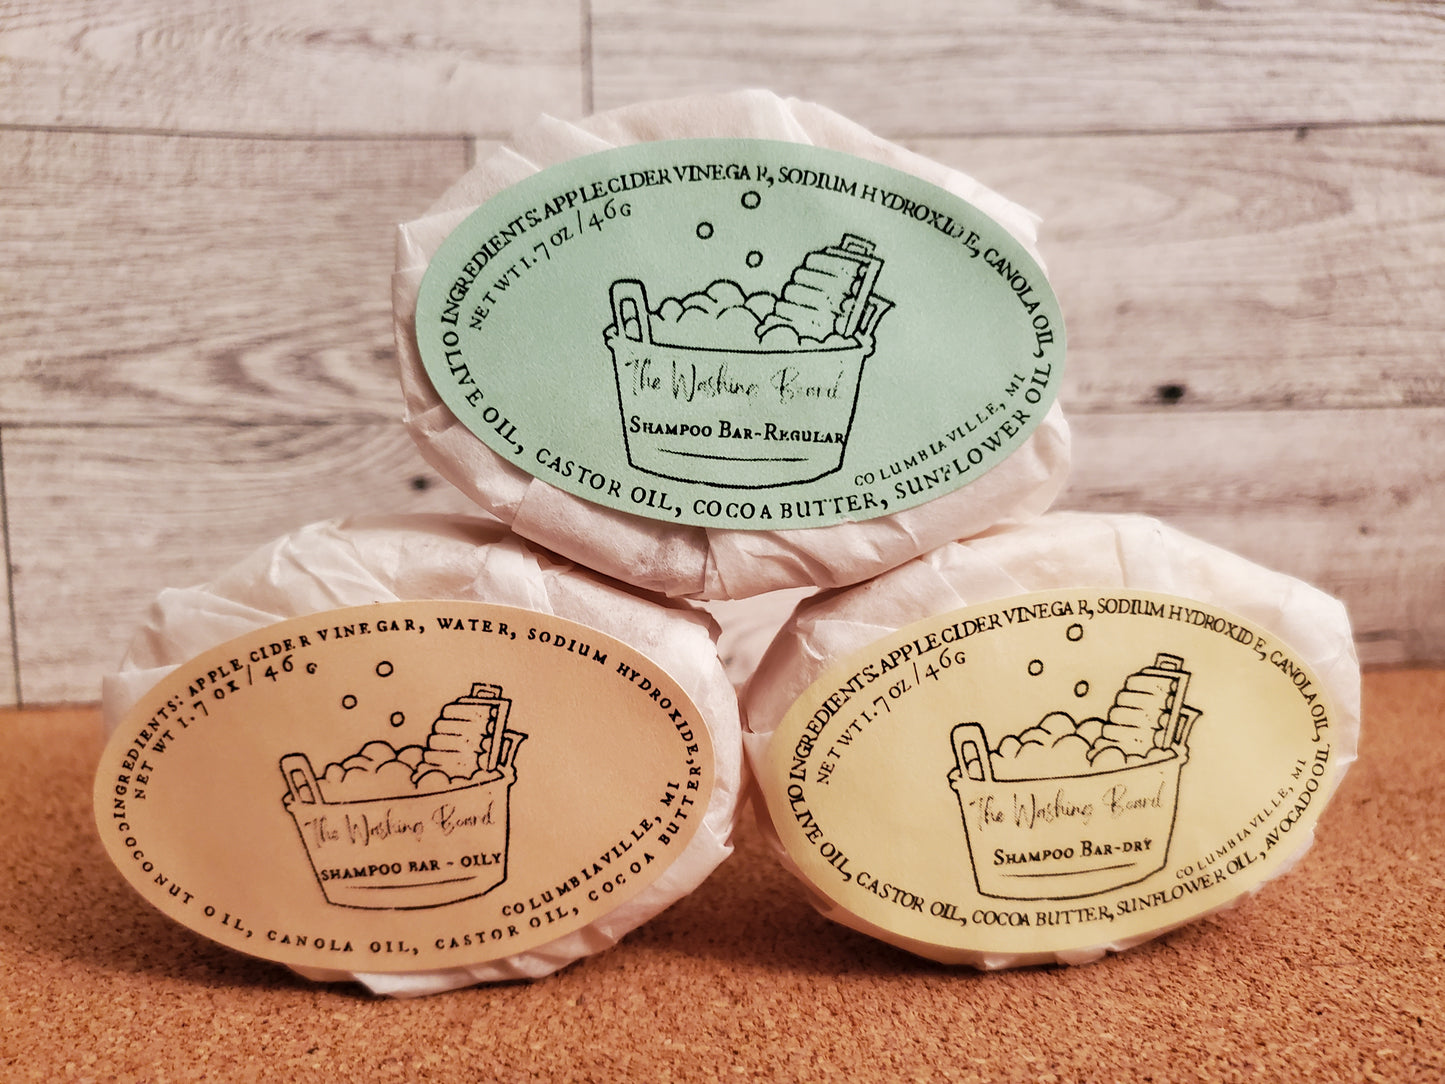 Shampoo bars, oily, regular and dry, shown together in eco friendly packaging. 